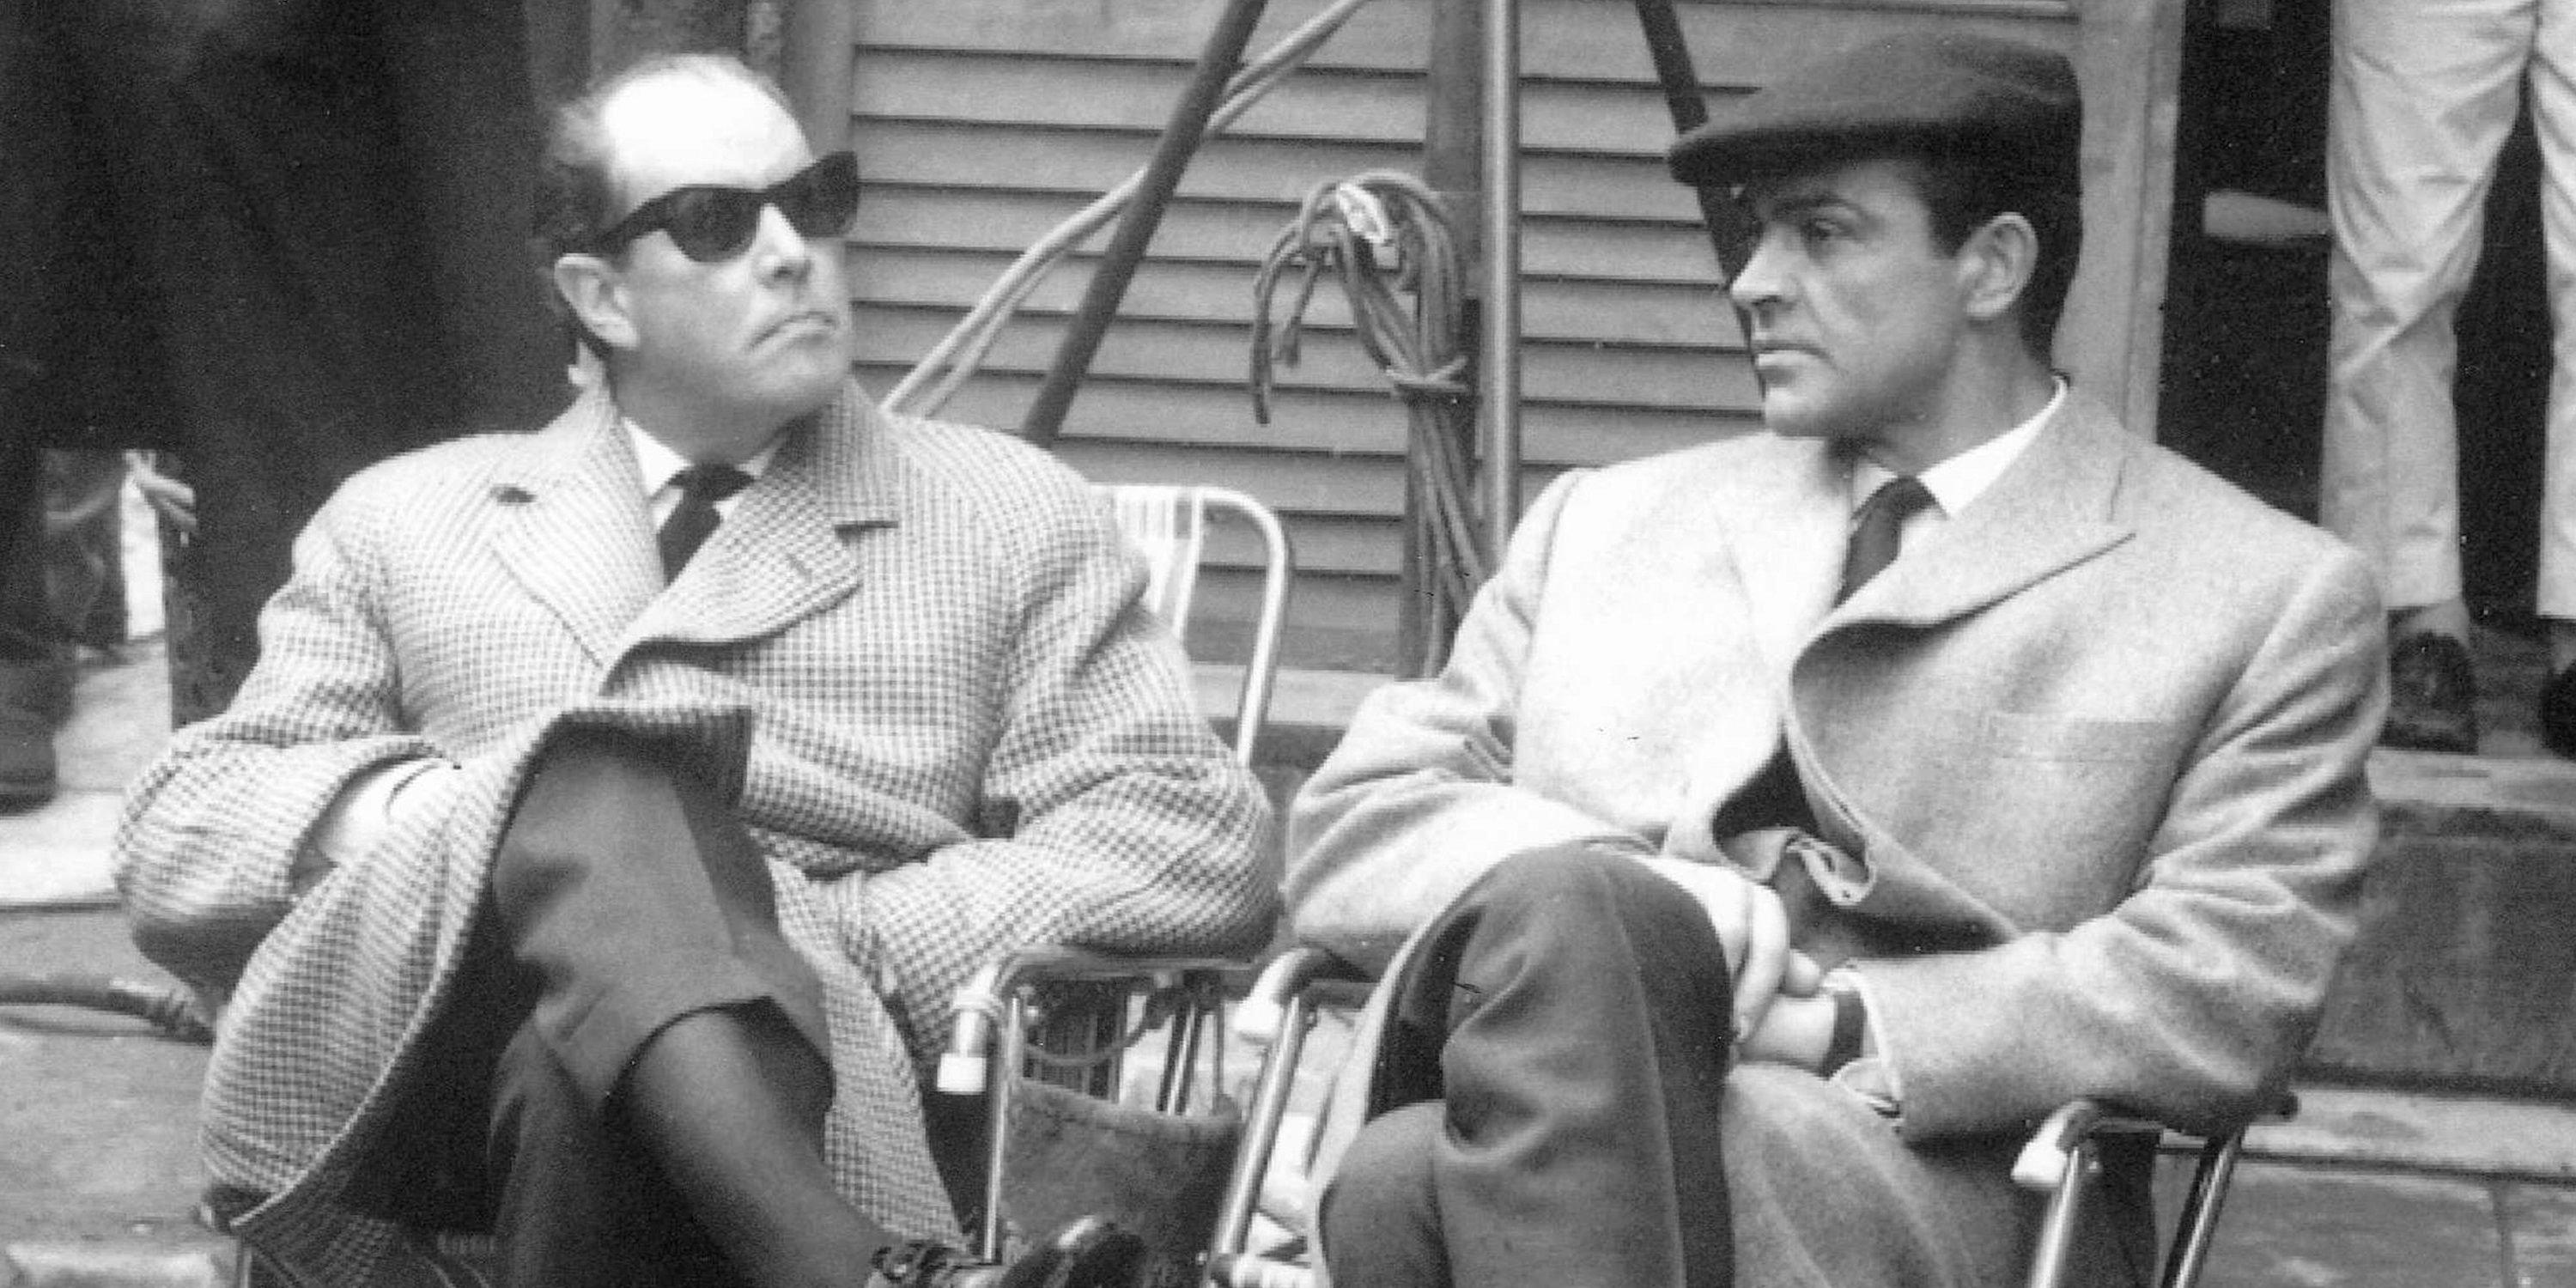 Terence_Young_and_Sean_Connery_on_the_set_of_From_Russia_with_Love